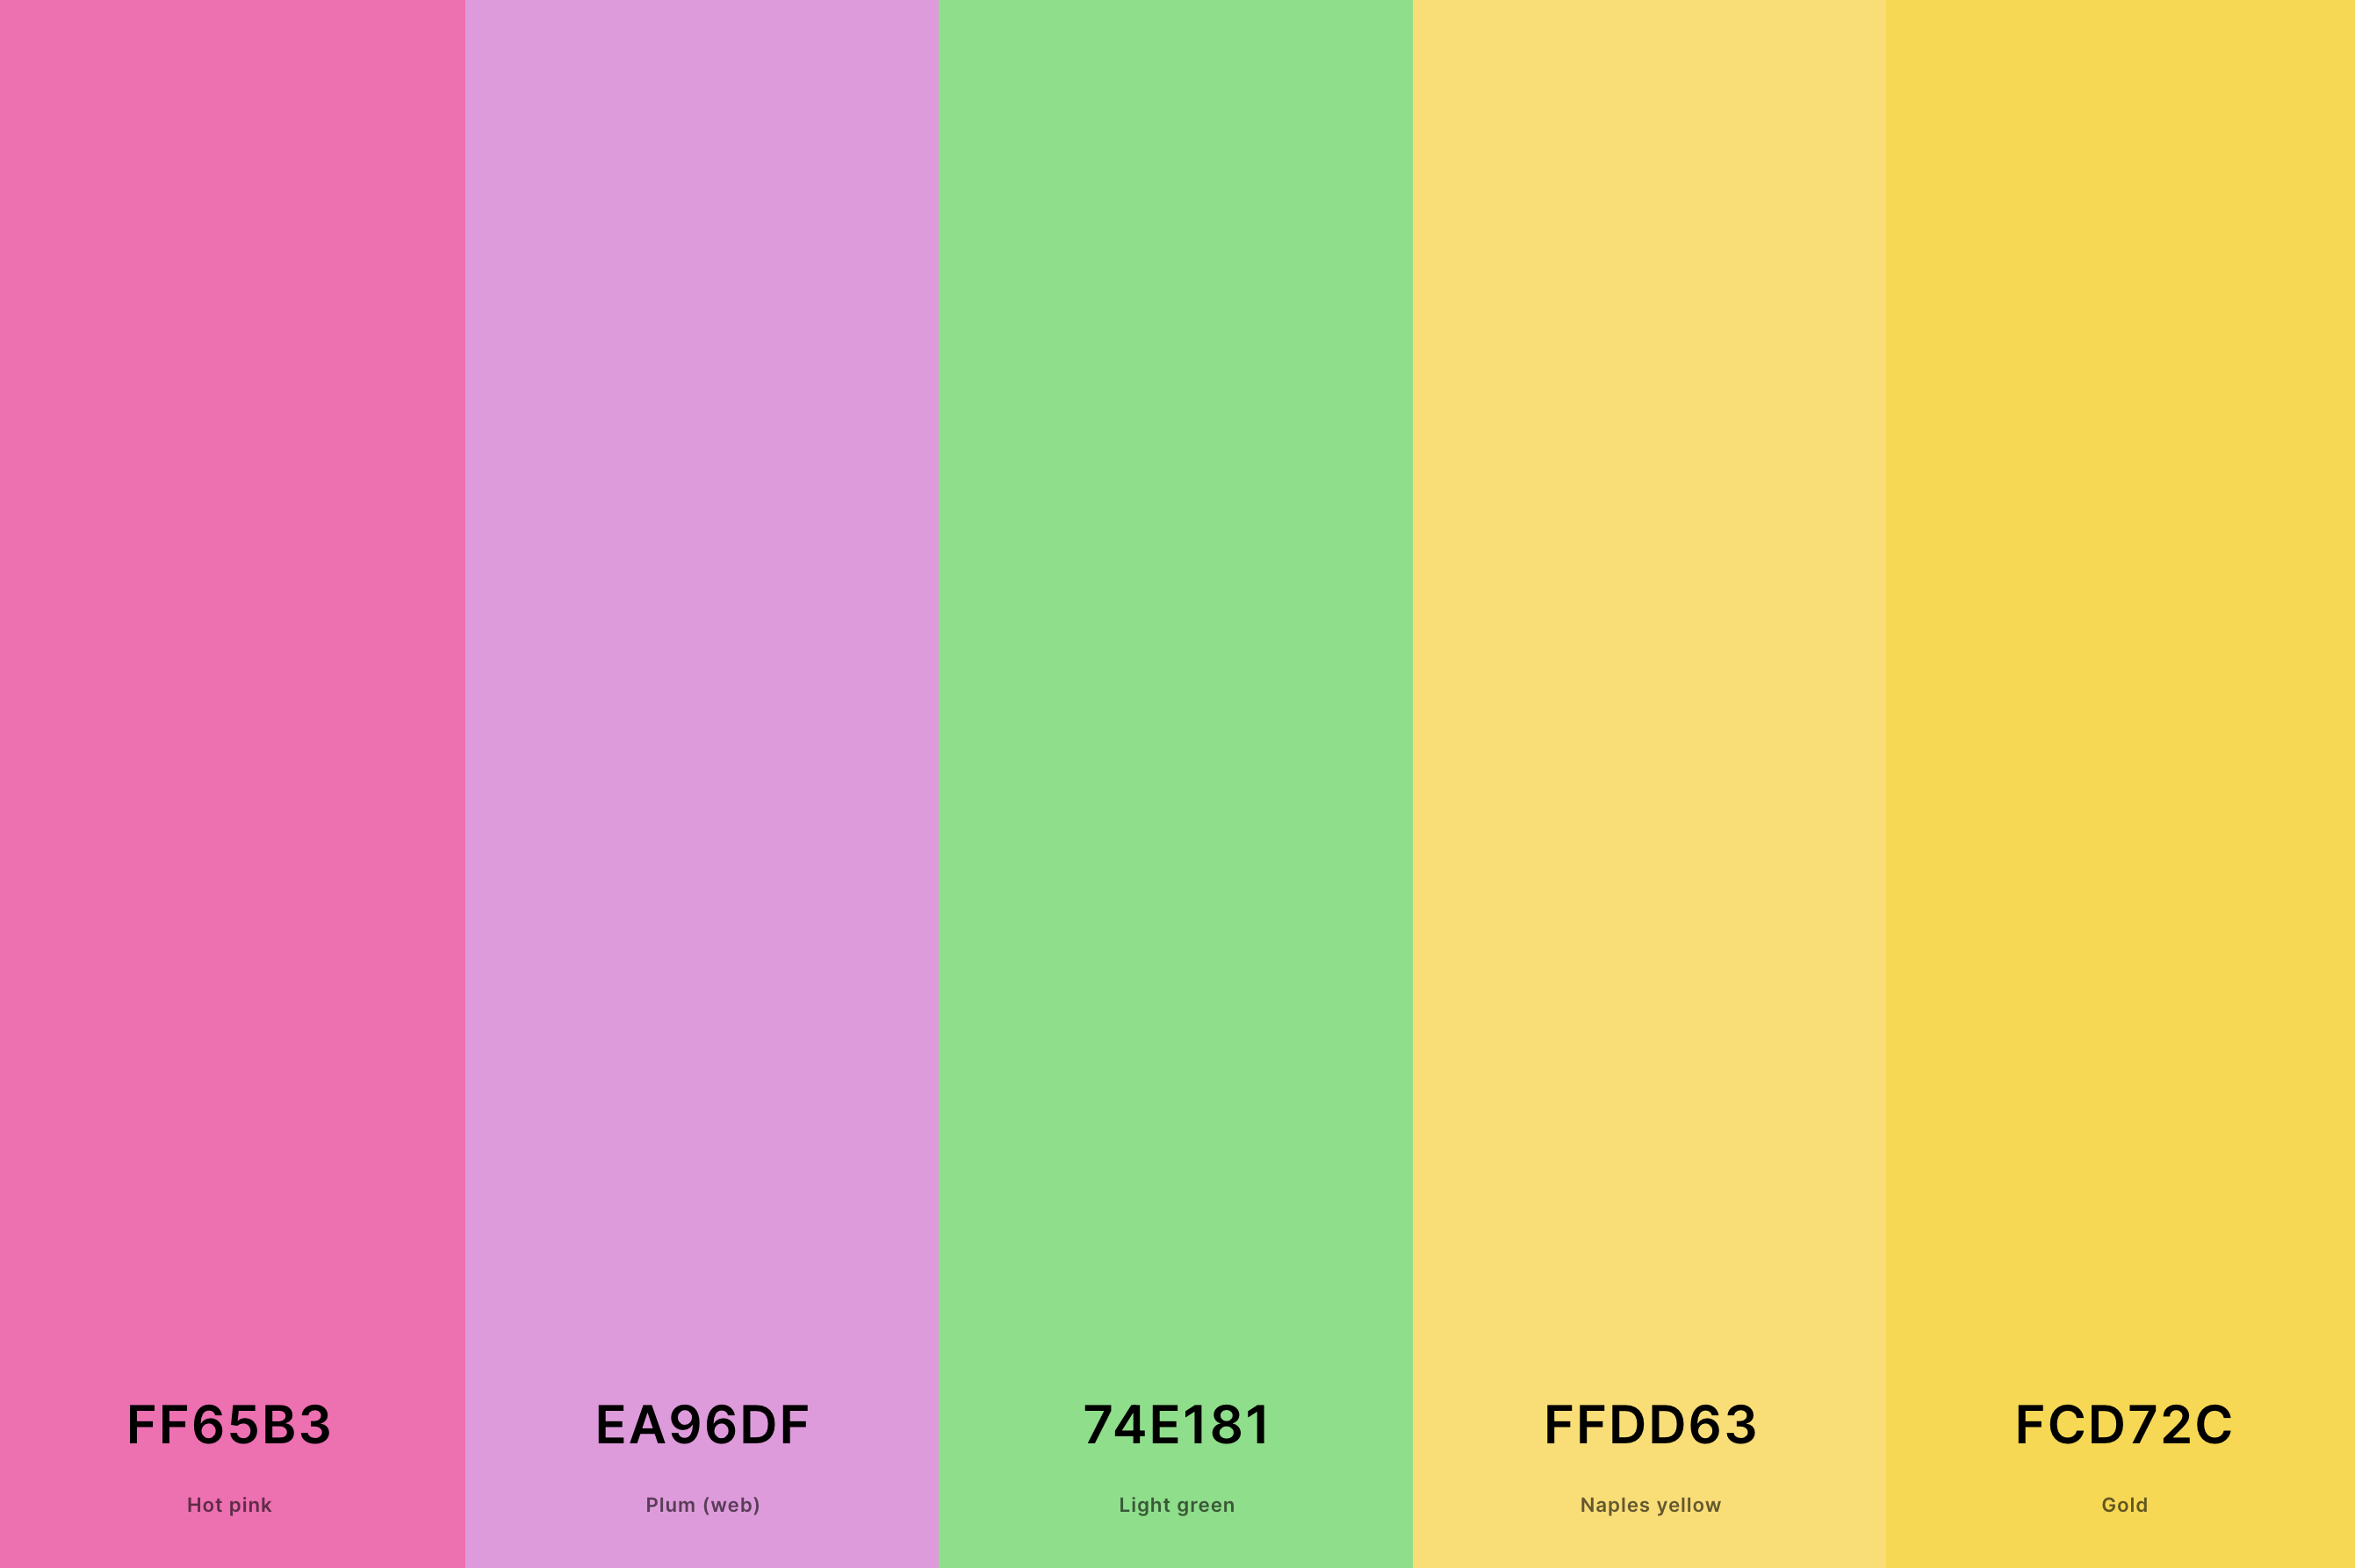 21. Pink, Green And Yellow Color Palette Color Palette with Hot Pink (Hex #FF65B3) + Plum (Web) (Hex #EA96DF) + Light Green (Hex #74E181) + Naples Yellow (Hex #FFDD63) + Gold (Hex #FCD72C) Color Palette with Hex Codes